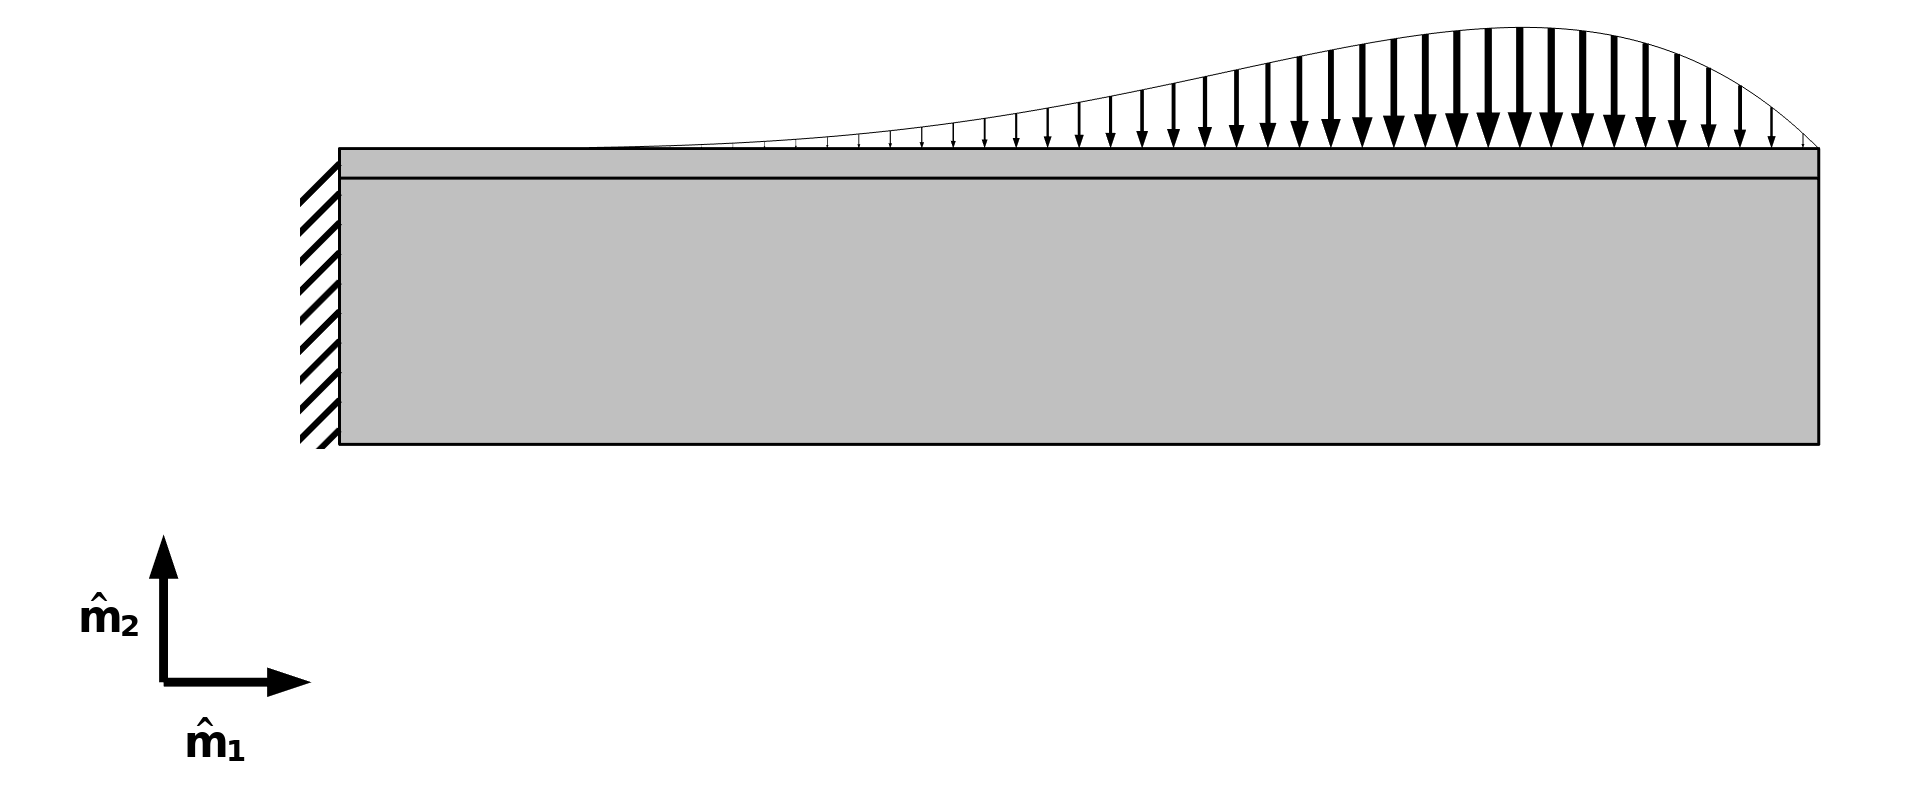 An aluminum beam model, where the left end is fixed, and the top boundary is subjected to a distributed load.